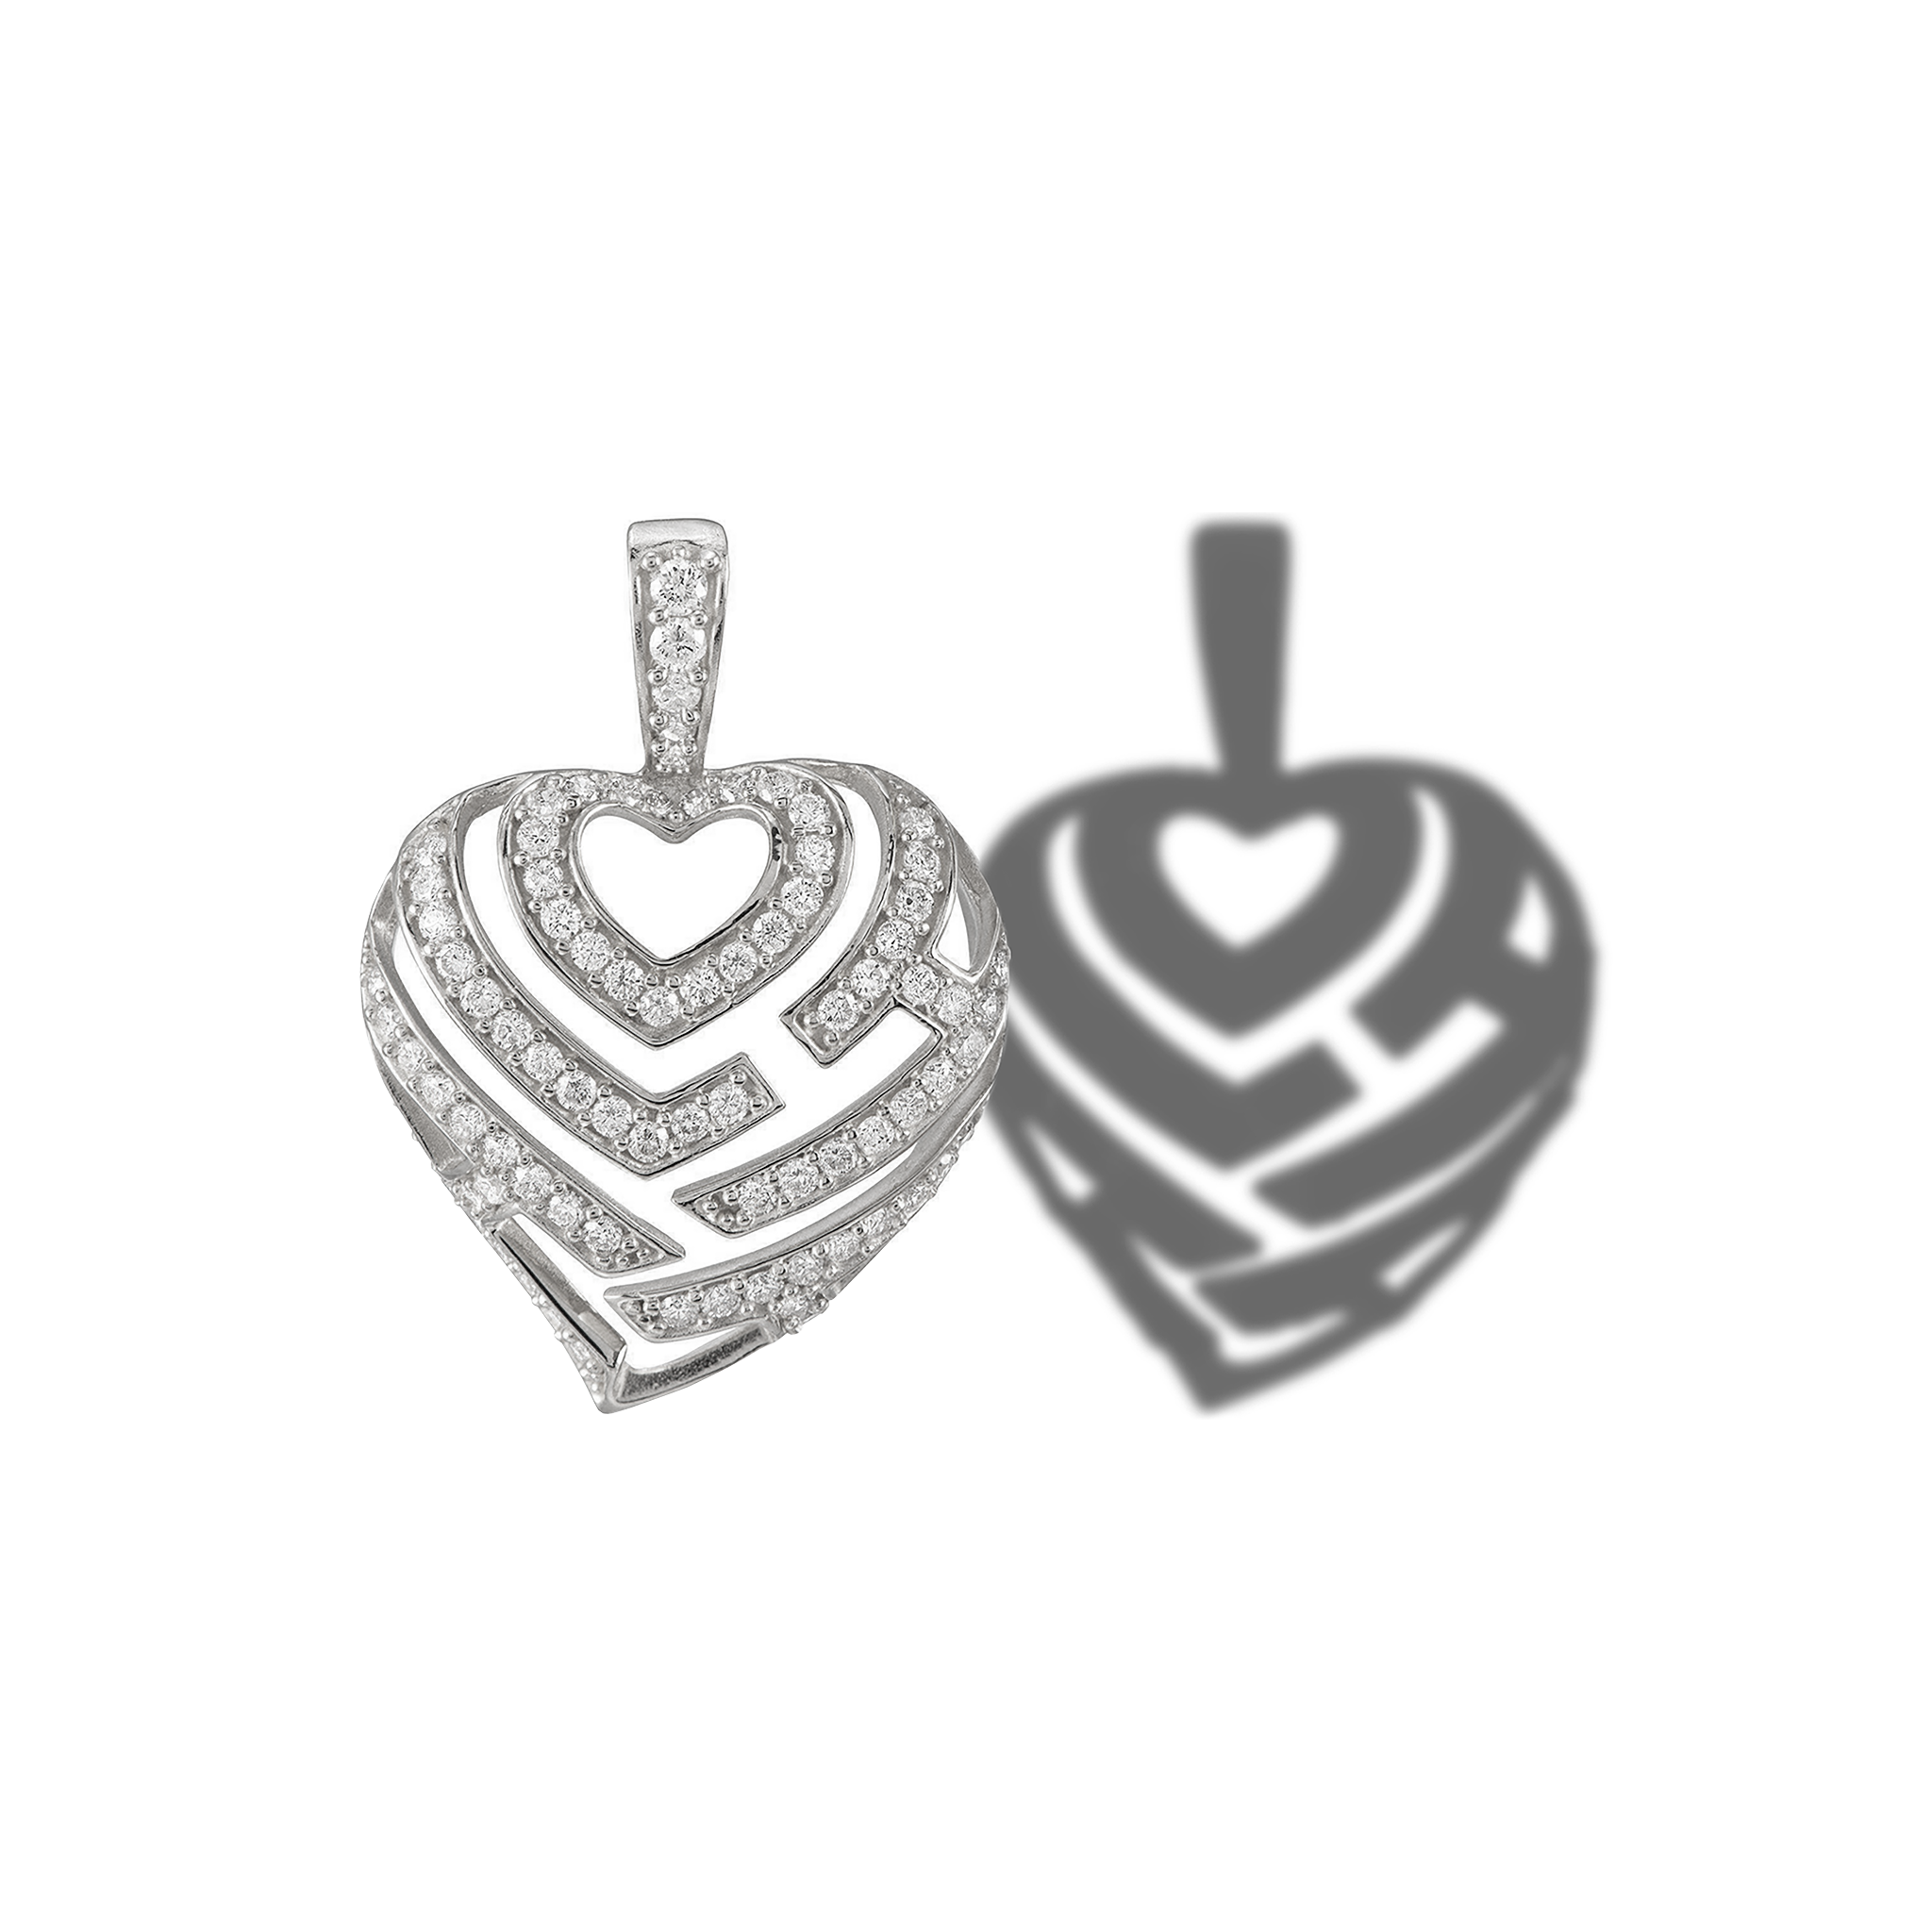 Aloha Heart Pendant in White Gold with Diamonds - 18mm